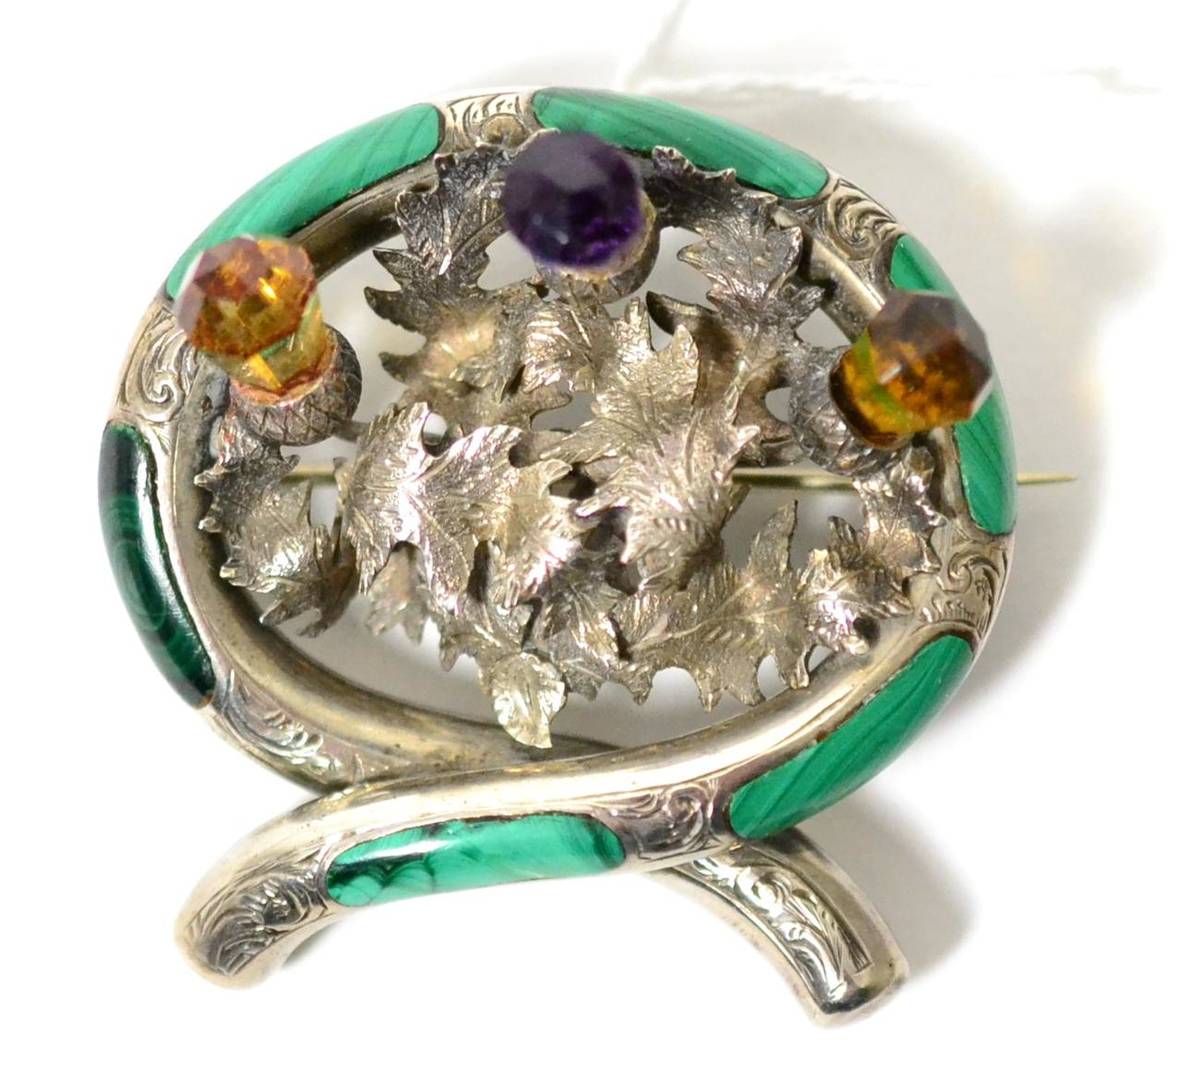 Lot 47 - A Scottish brooch, with a central group of three thistles, the tops set with a faceted amethyst and